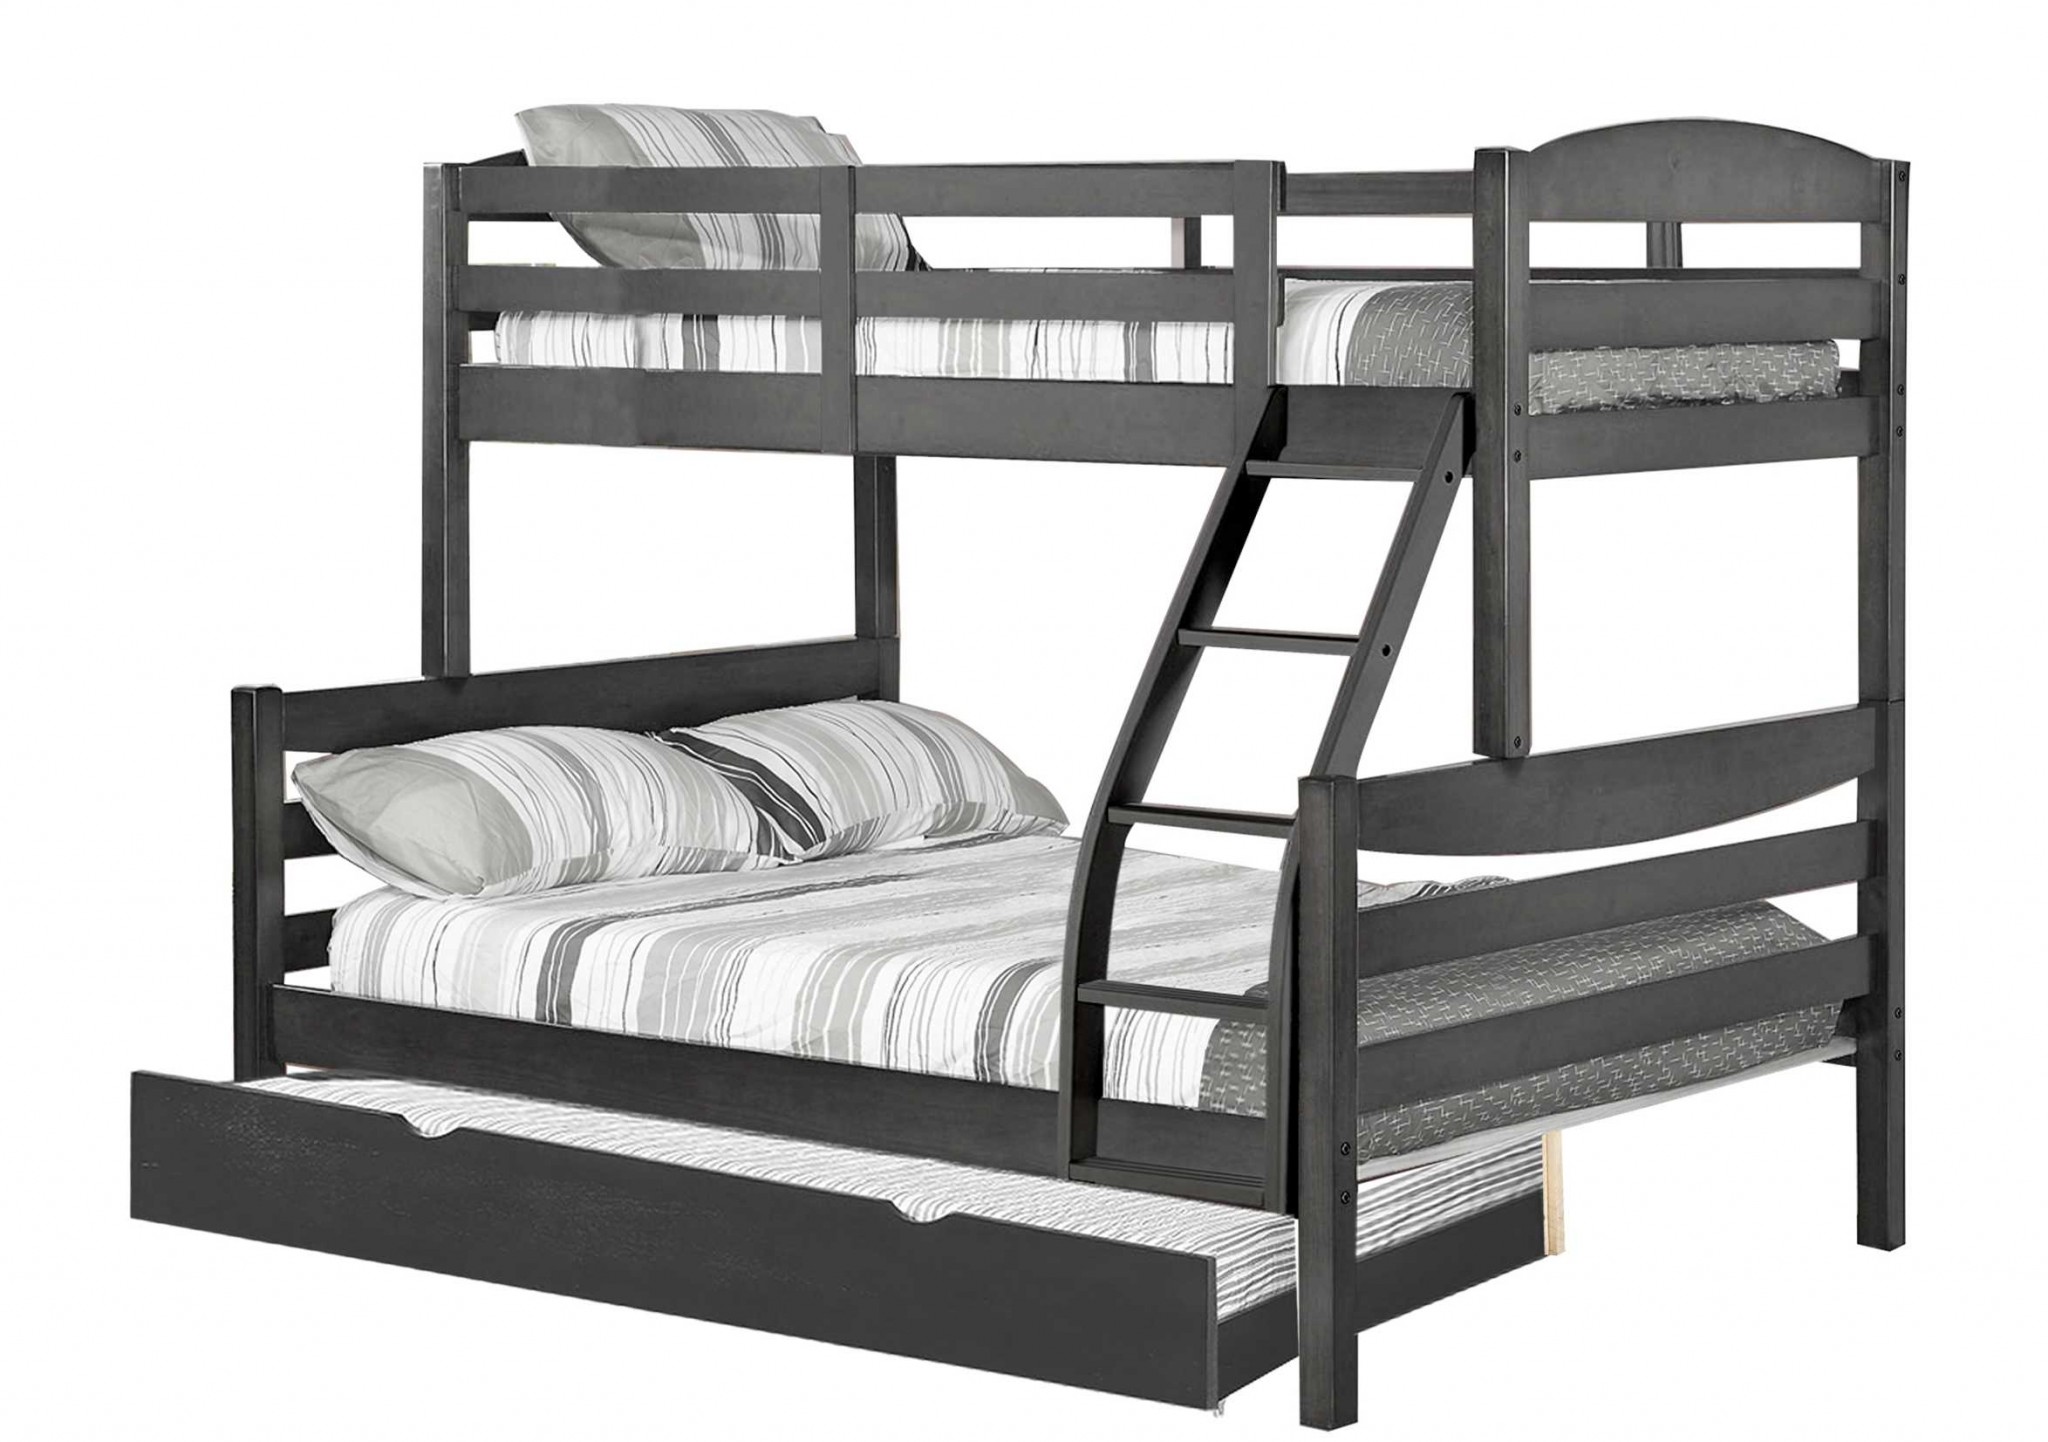 81" X 42.5-57.25" X 66.75" Grey Solid and Manufactured Wood Twin or Full Bunk Bed with Matching Trundle